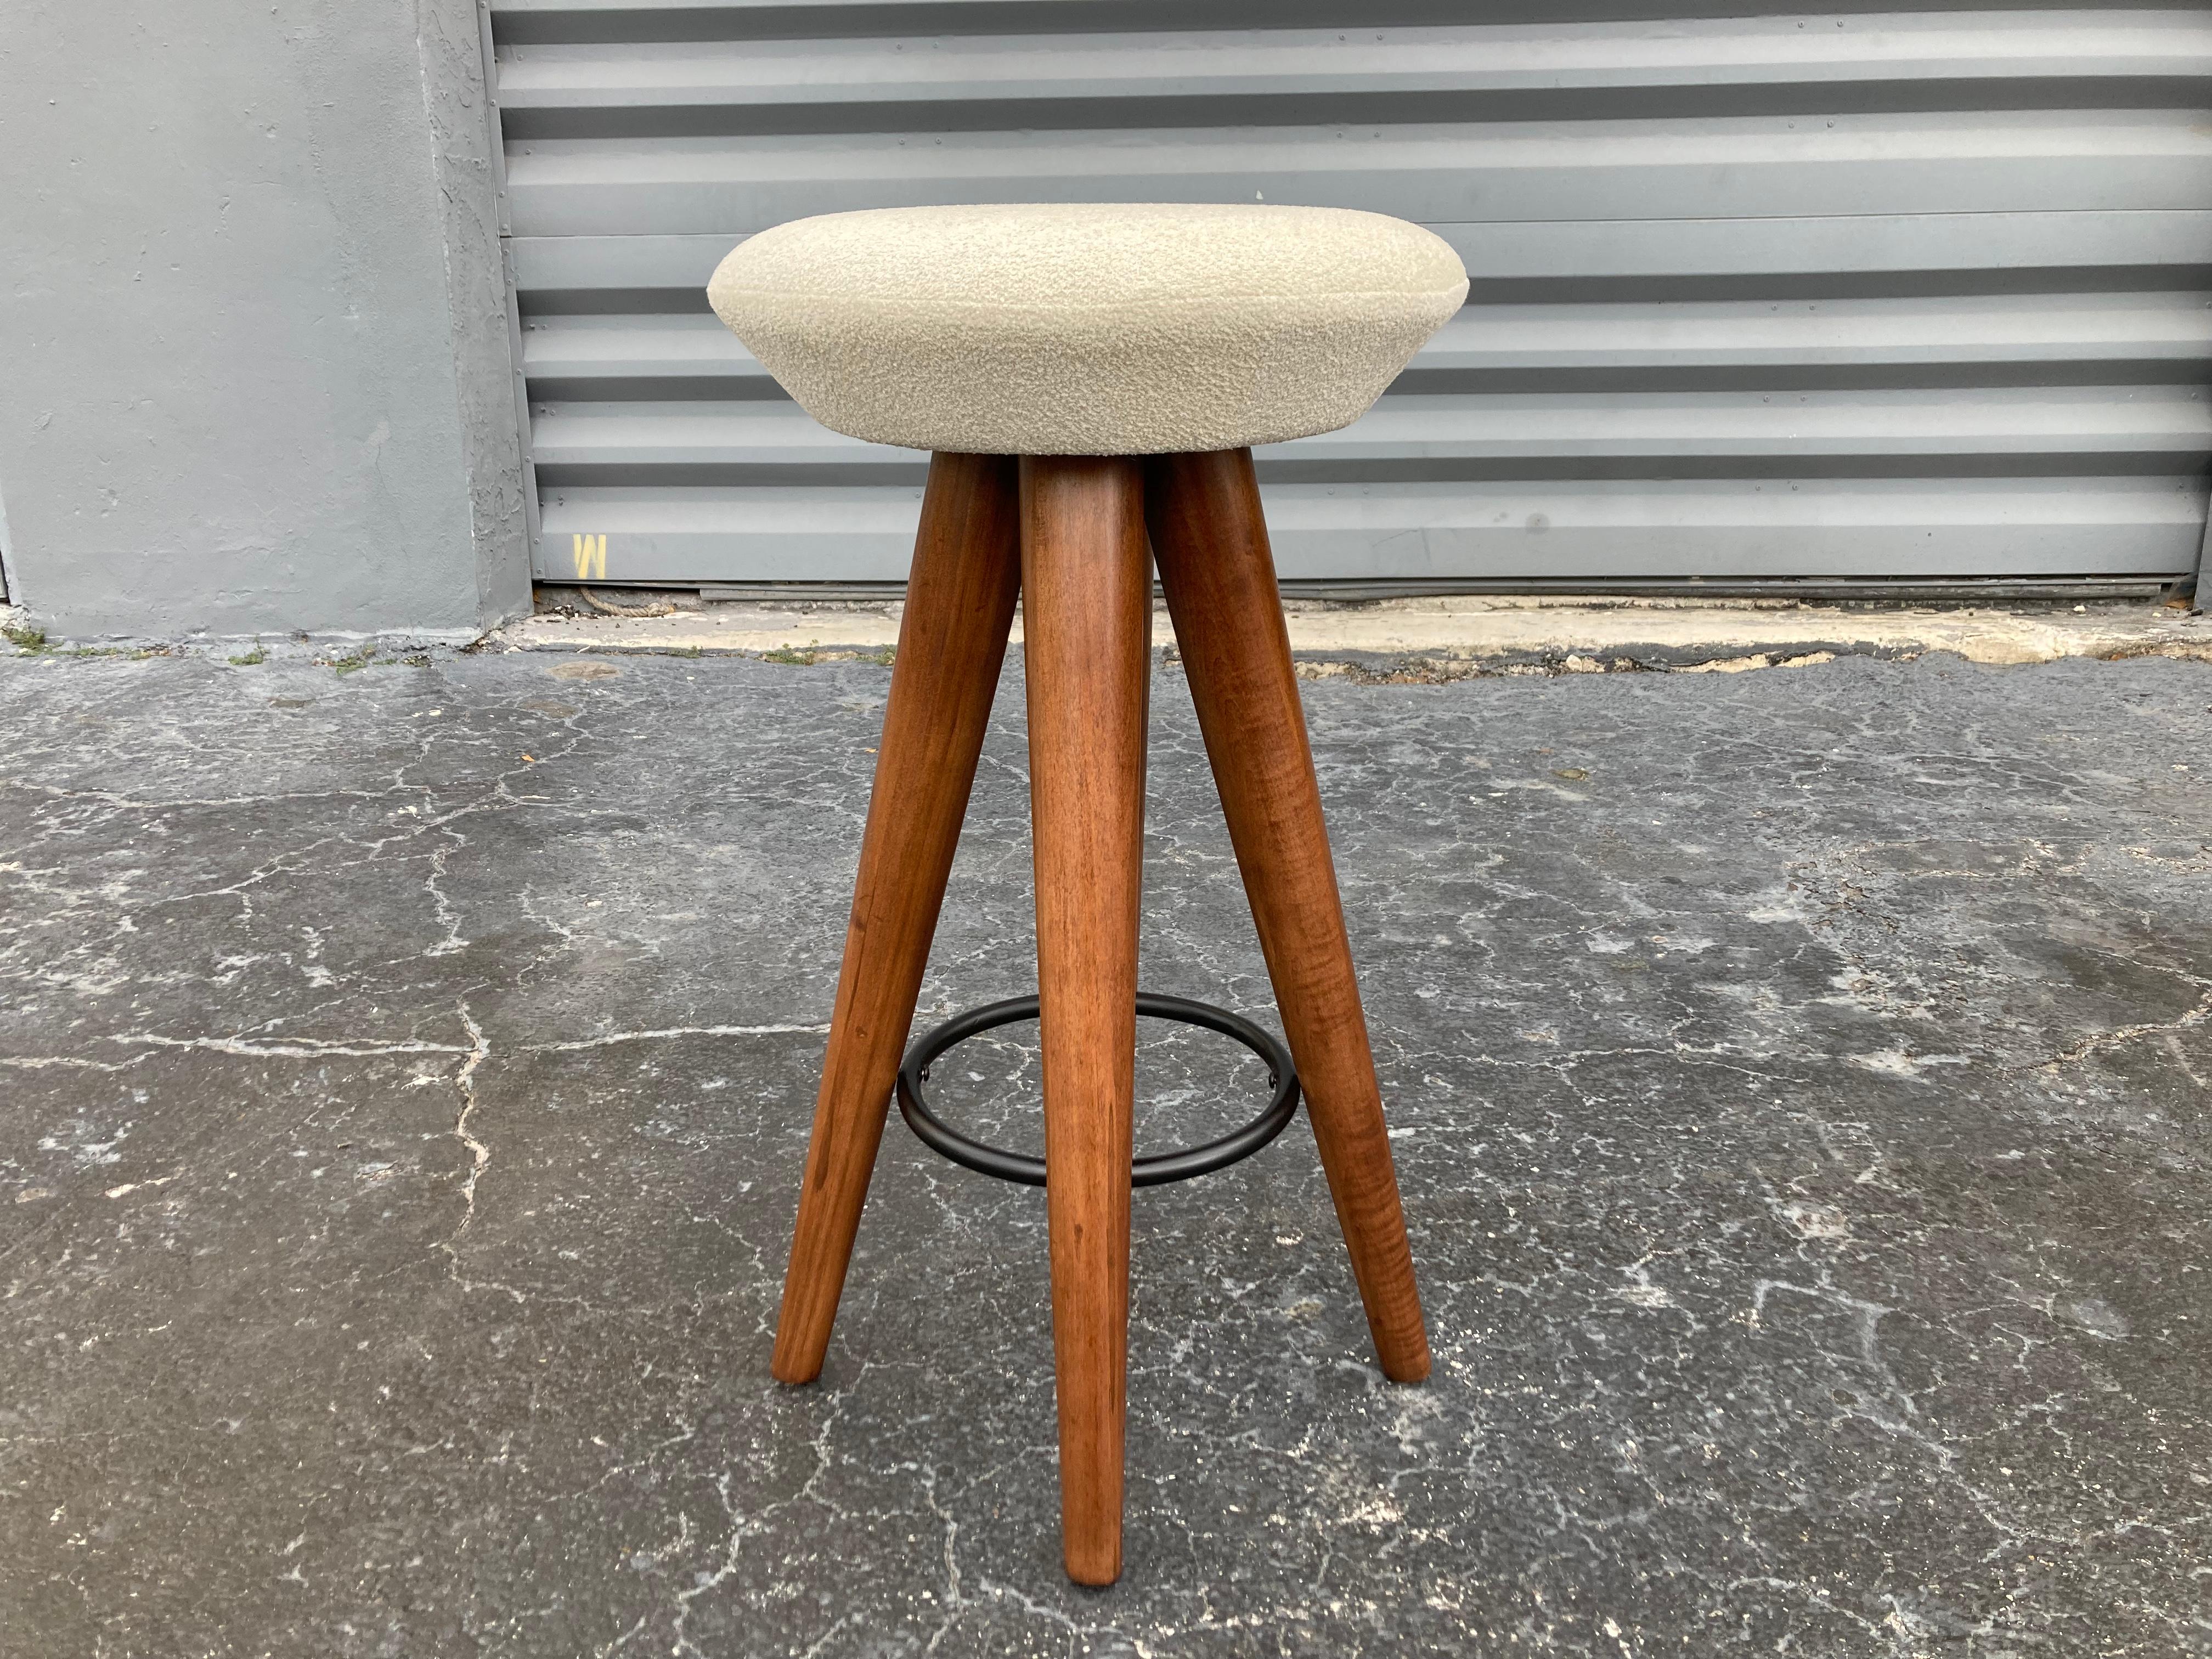 Set of 4 Mid-Century Modern bar stools, seats were recovered in beautiful ivory fabric. Legs have a walnut finish. Ready for a new home.